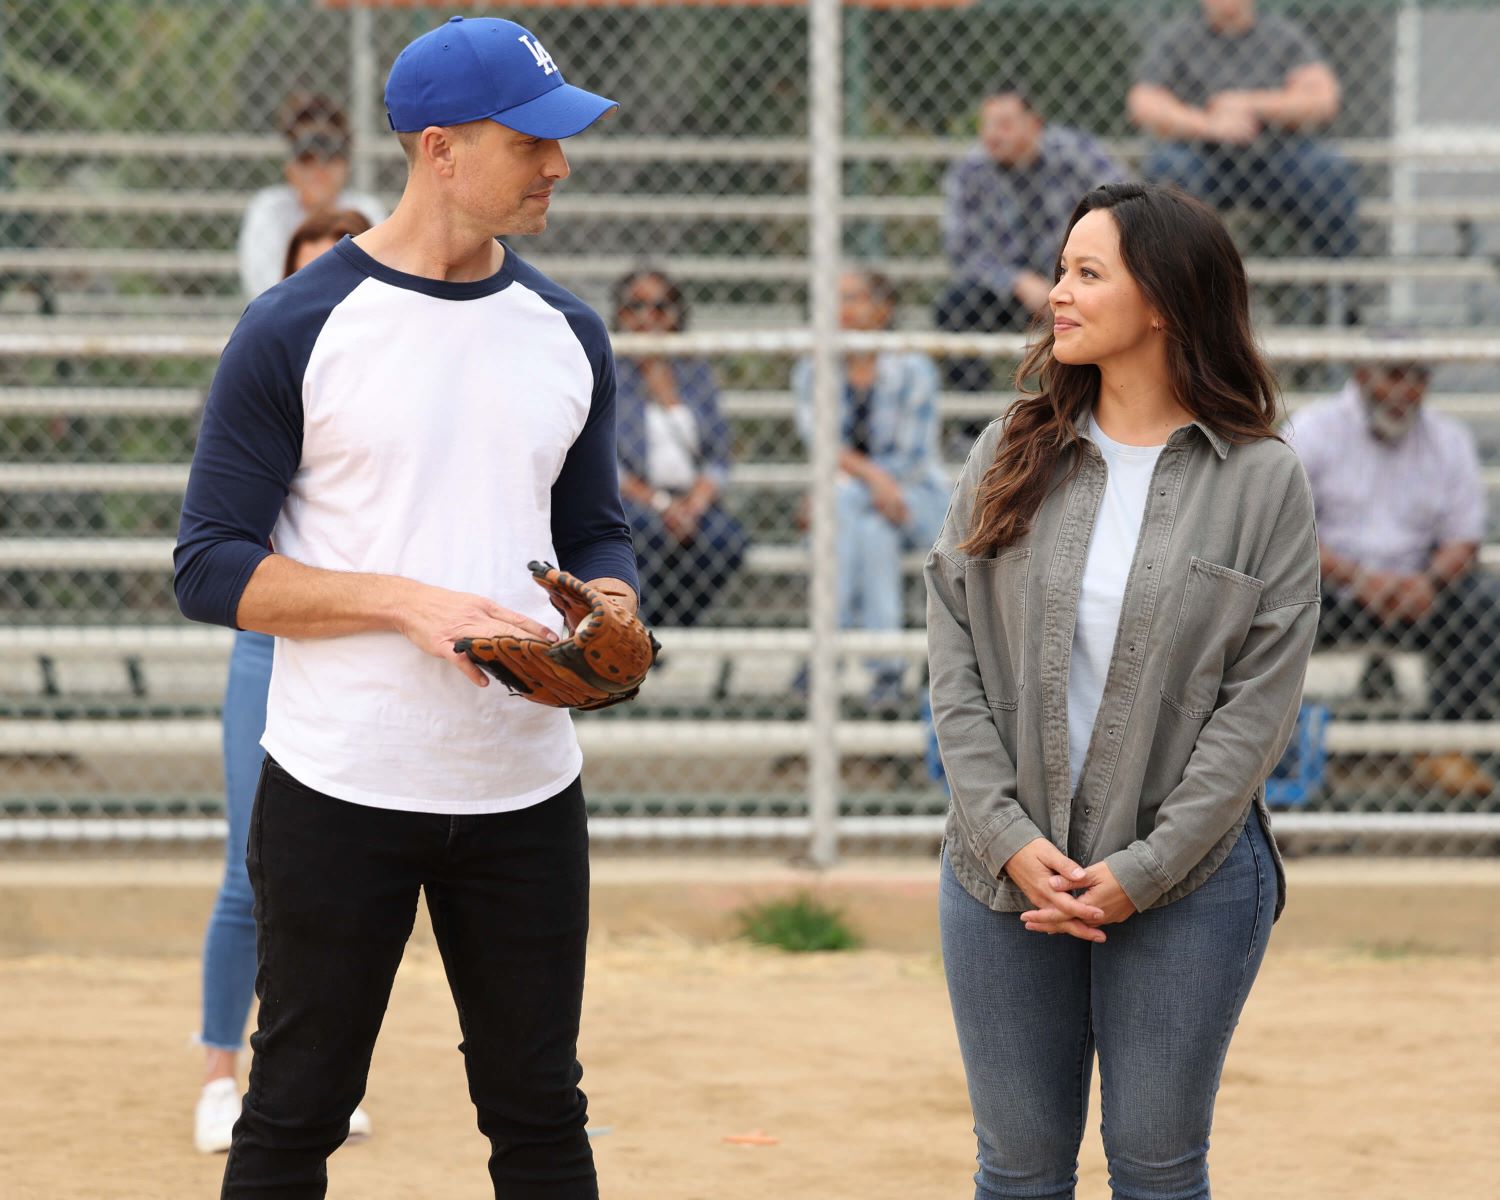 Eric Winter as Tim Bradford and Melissa O'Neil as Lucy Chen in 'The Rookie' Season 5 Episode 11.